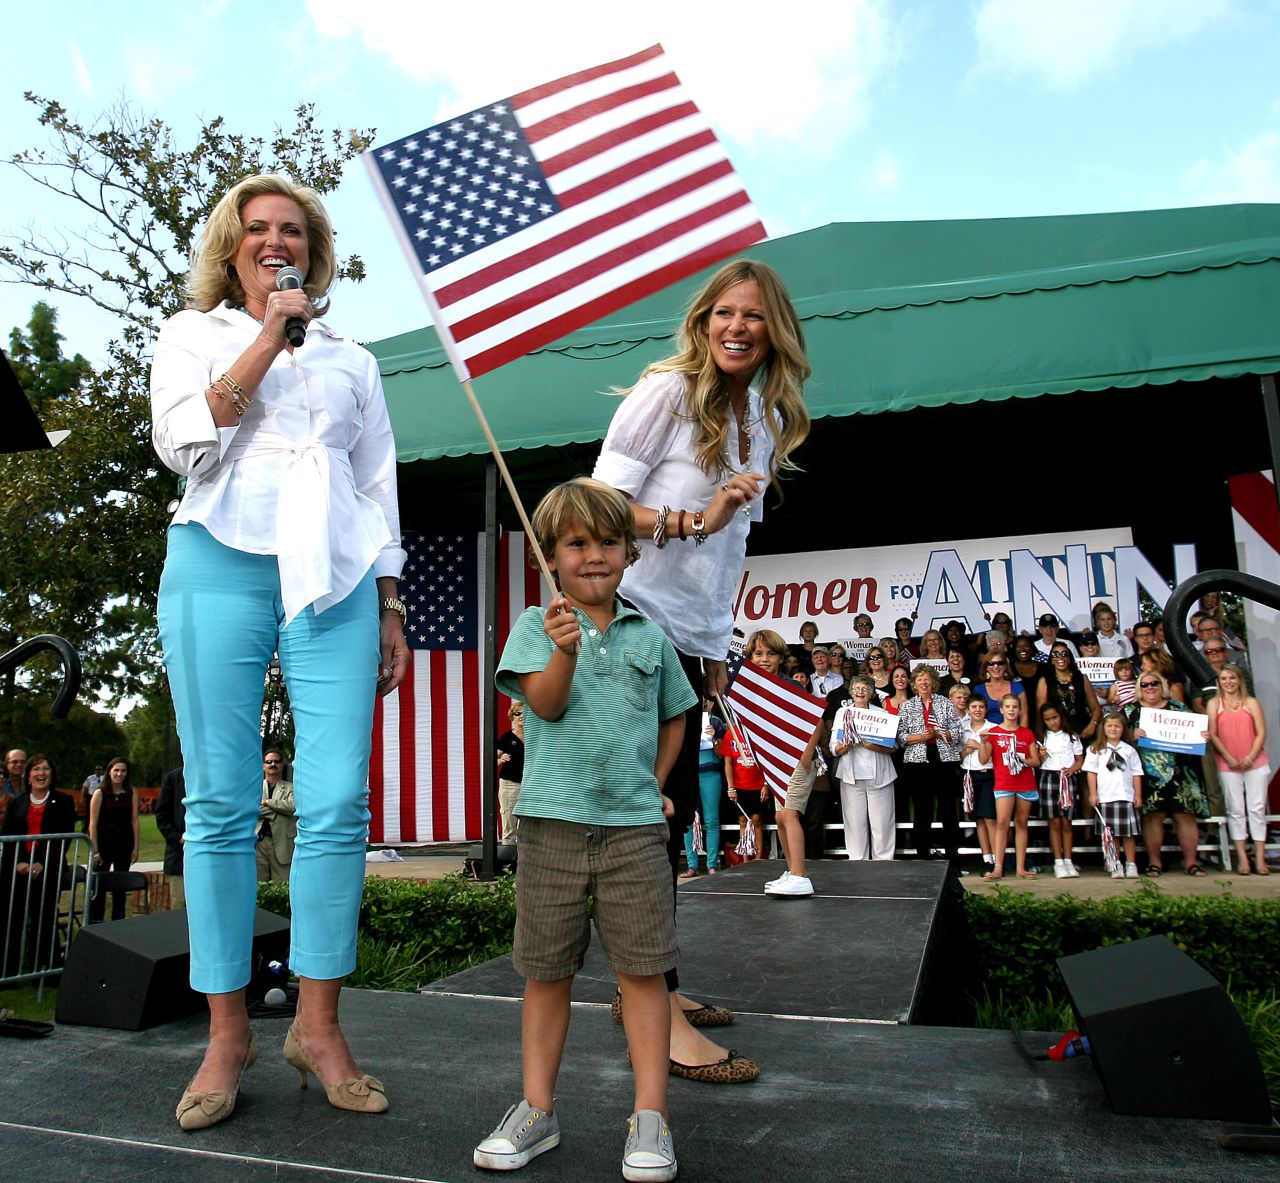 Ann Romney responds to cheering supporters with her grandson  Miles Romney and his mom, Mary Romney, in 2012.